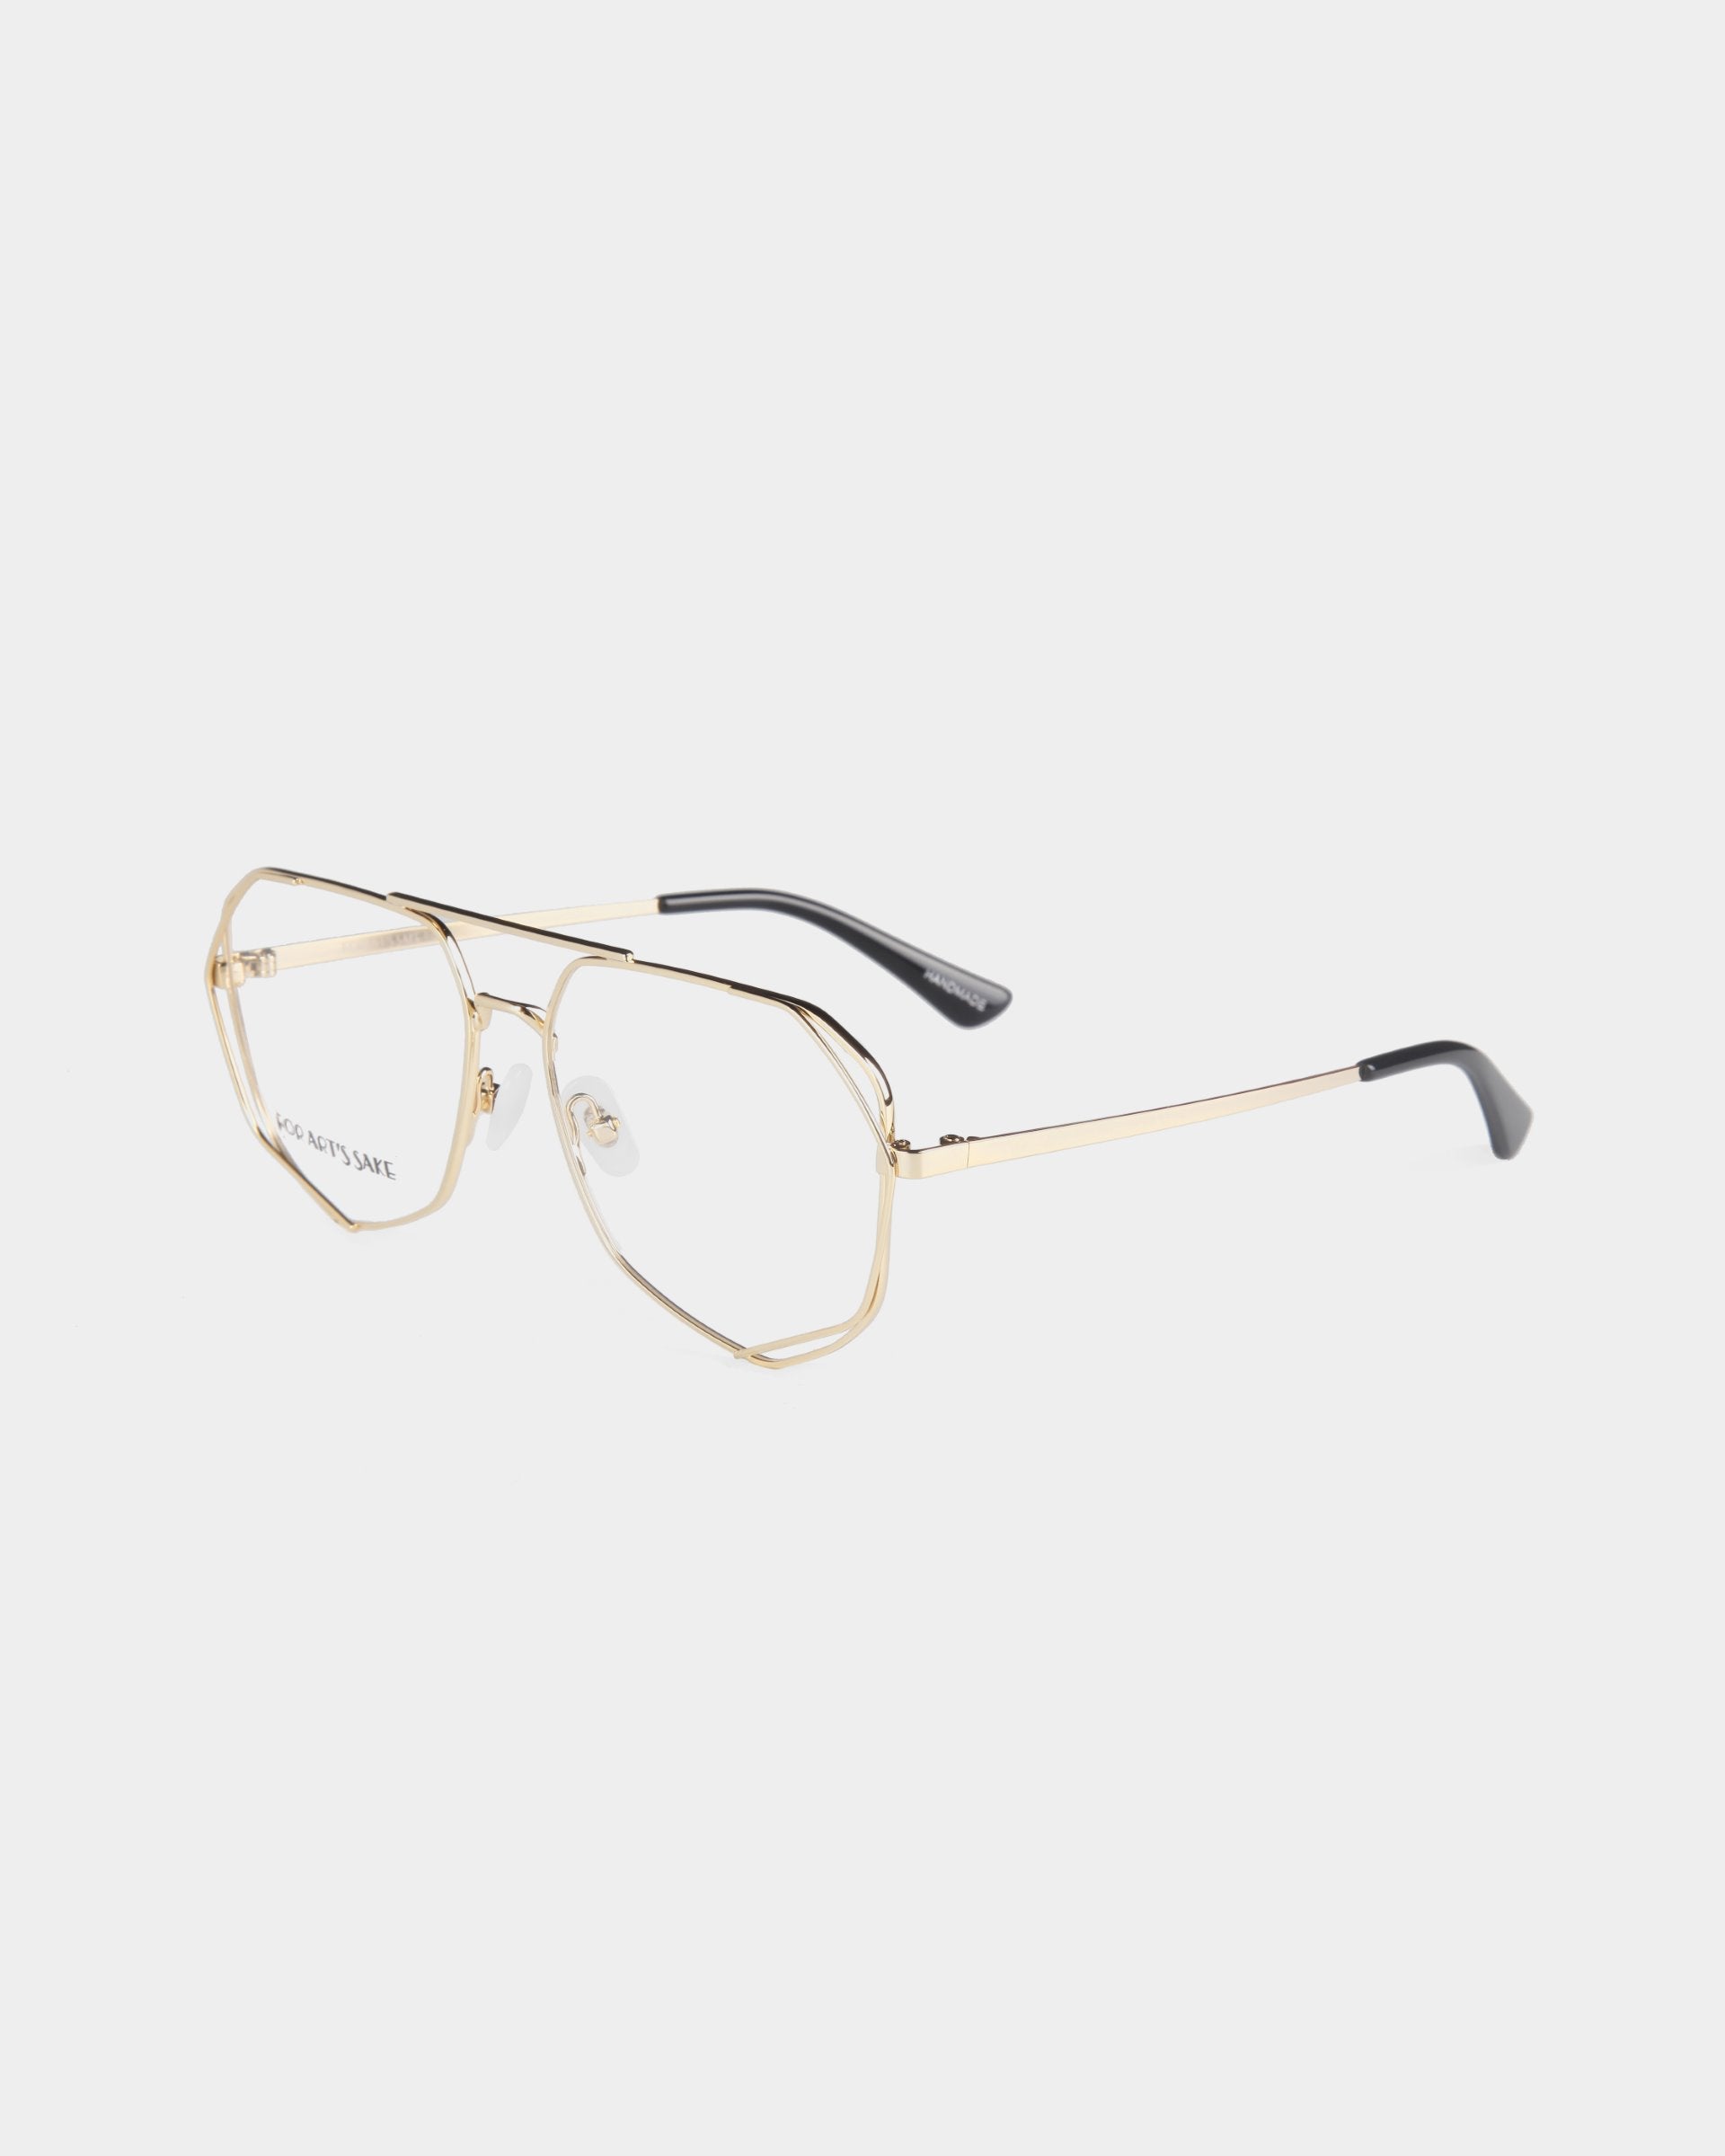 A pair of Genius eyeglasses with a thin stainless steel frame by For Art&#39;s Sake®. The lenses are clear, the nose pads are adjustable, and the temple tips are black. The design is sleek and modern, with an angular shape. Available with a blue light filter or via prescription service, they are displayed against a white background.